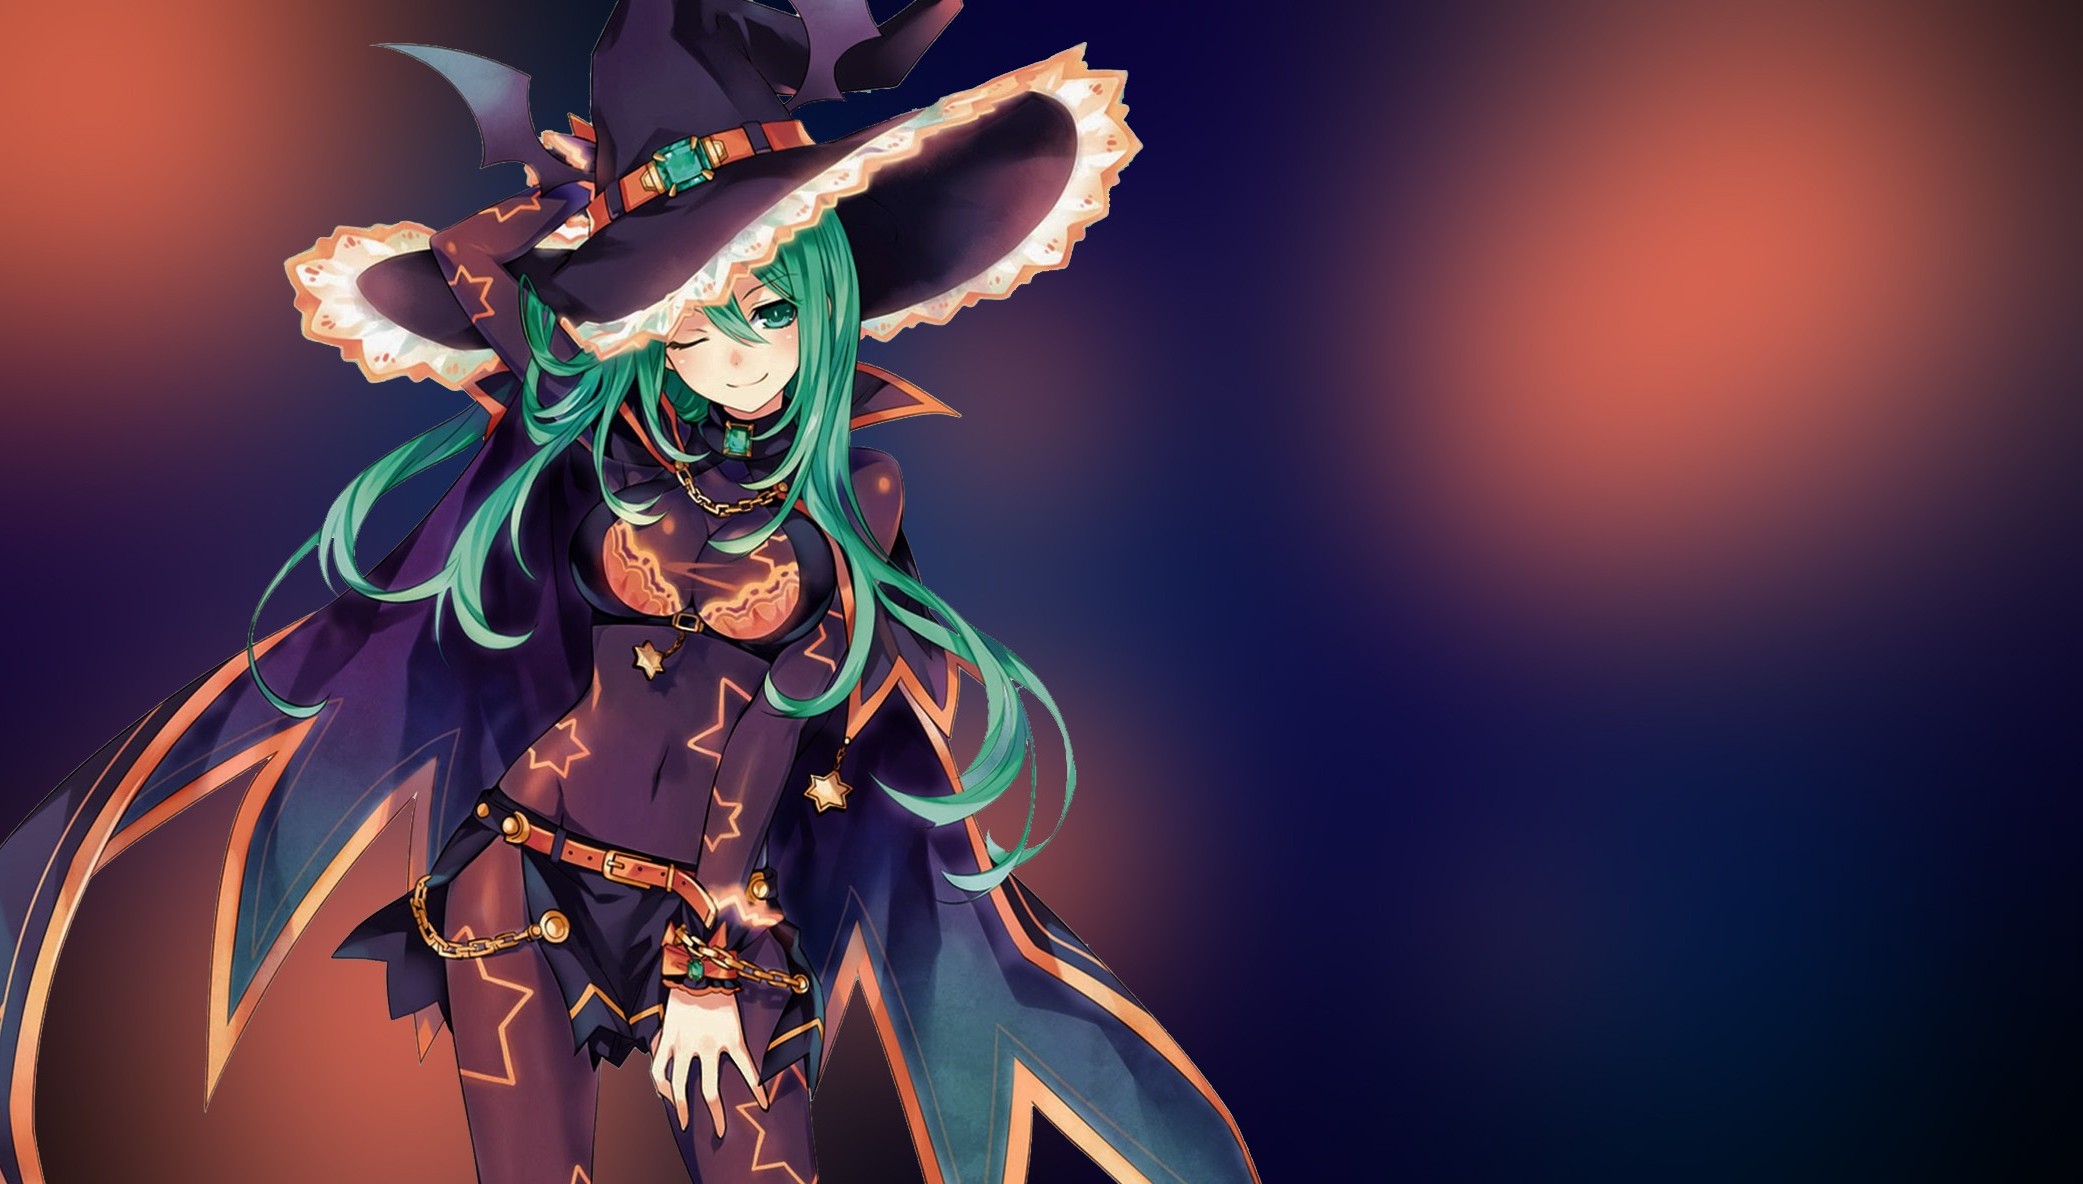 Witch Green Hair Anime Anime Girls Wallpapers Hd Desktop And Mobile Backgrounds